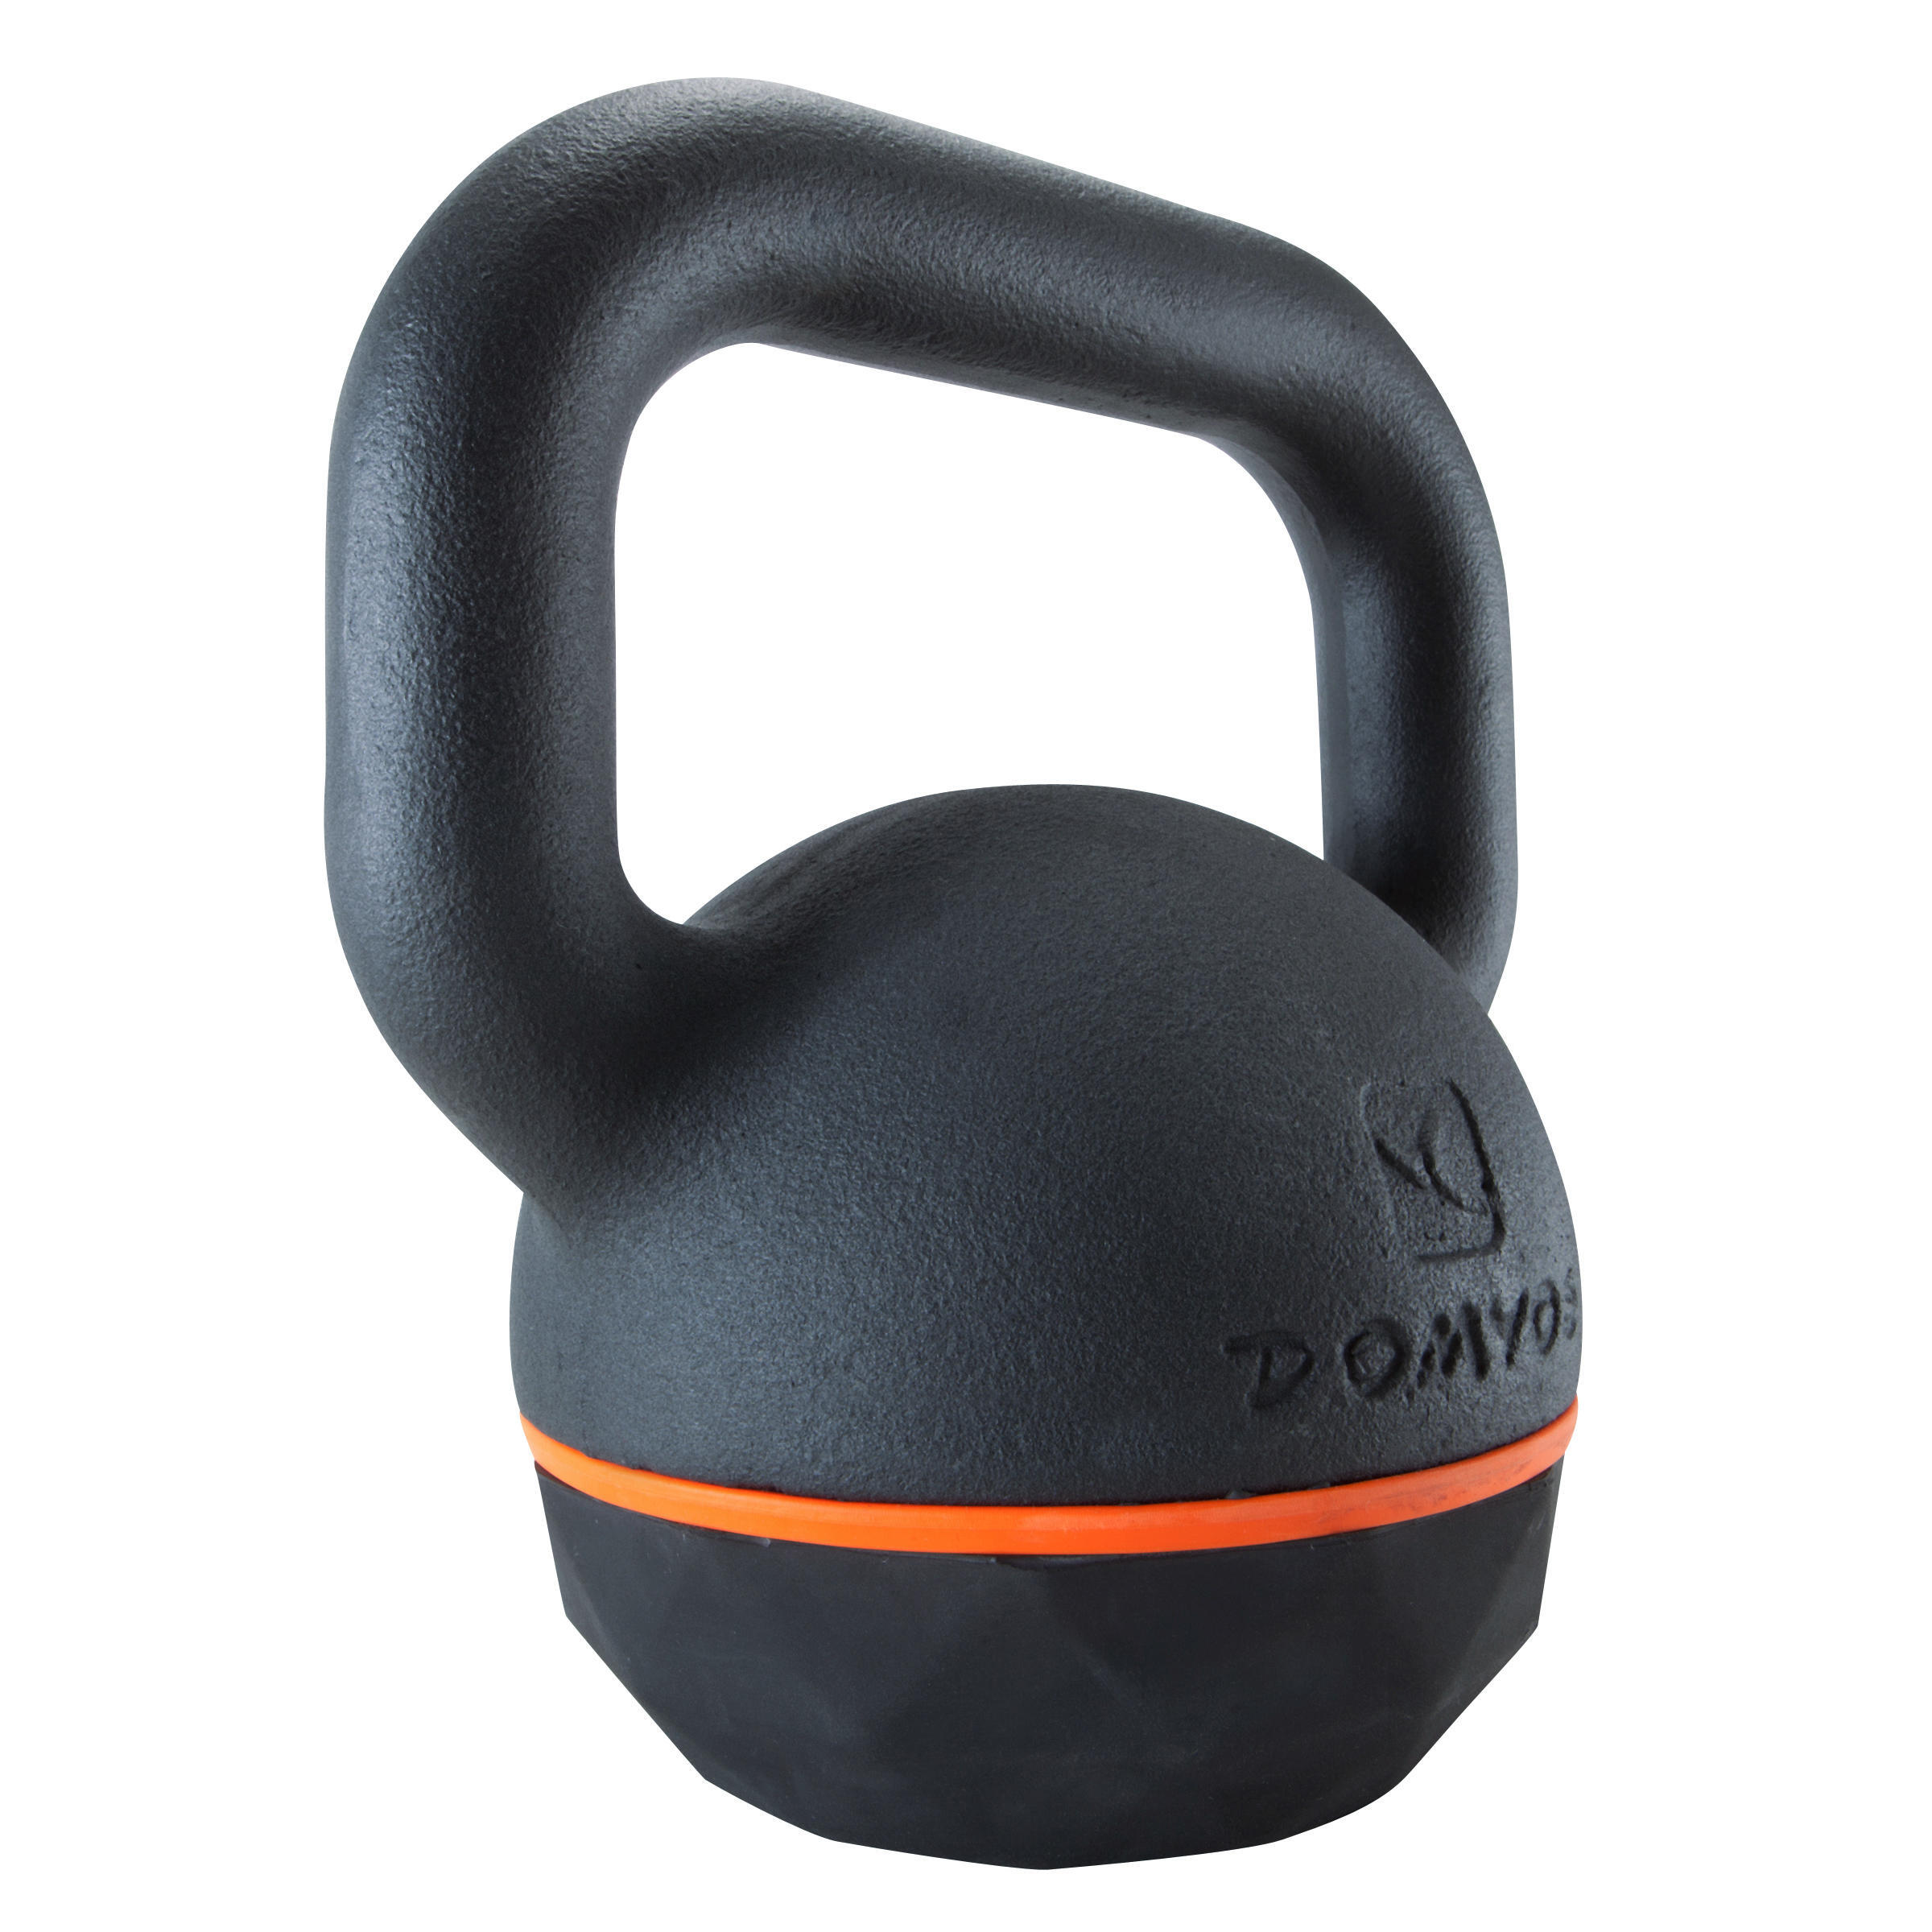 Cast Iron Kettlebell with Rubber Base - 16 kg 3/8